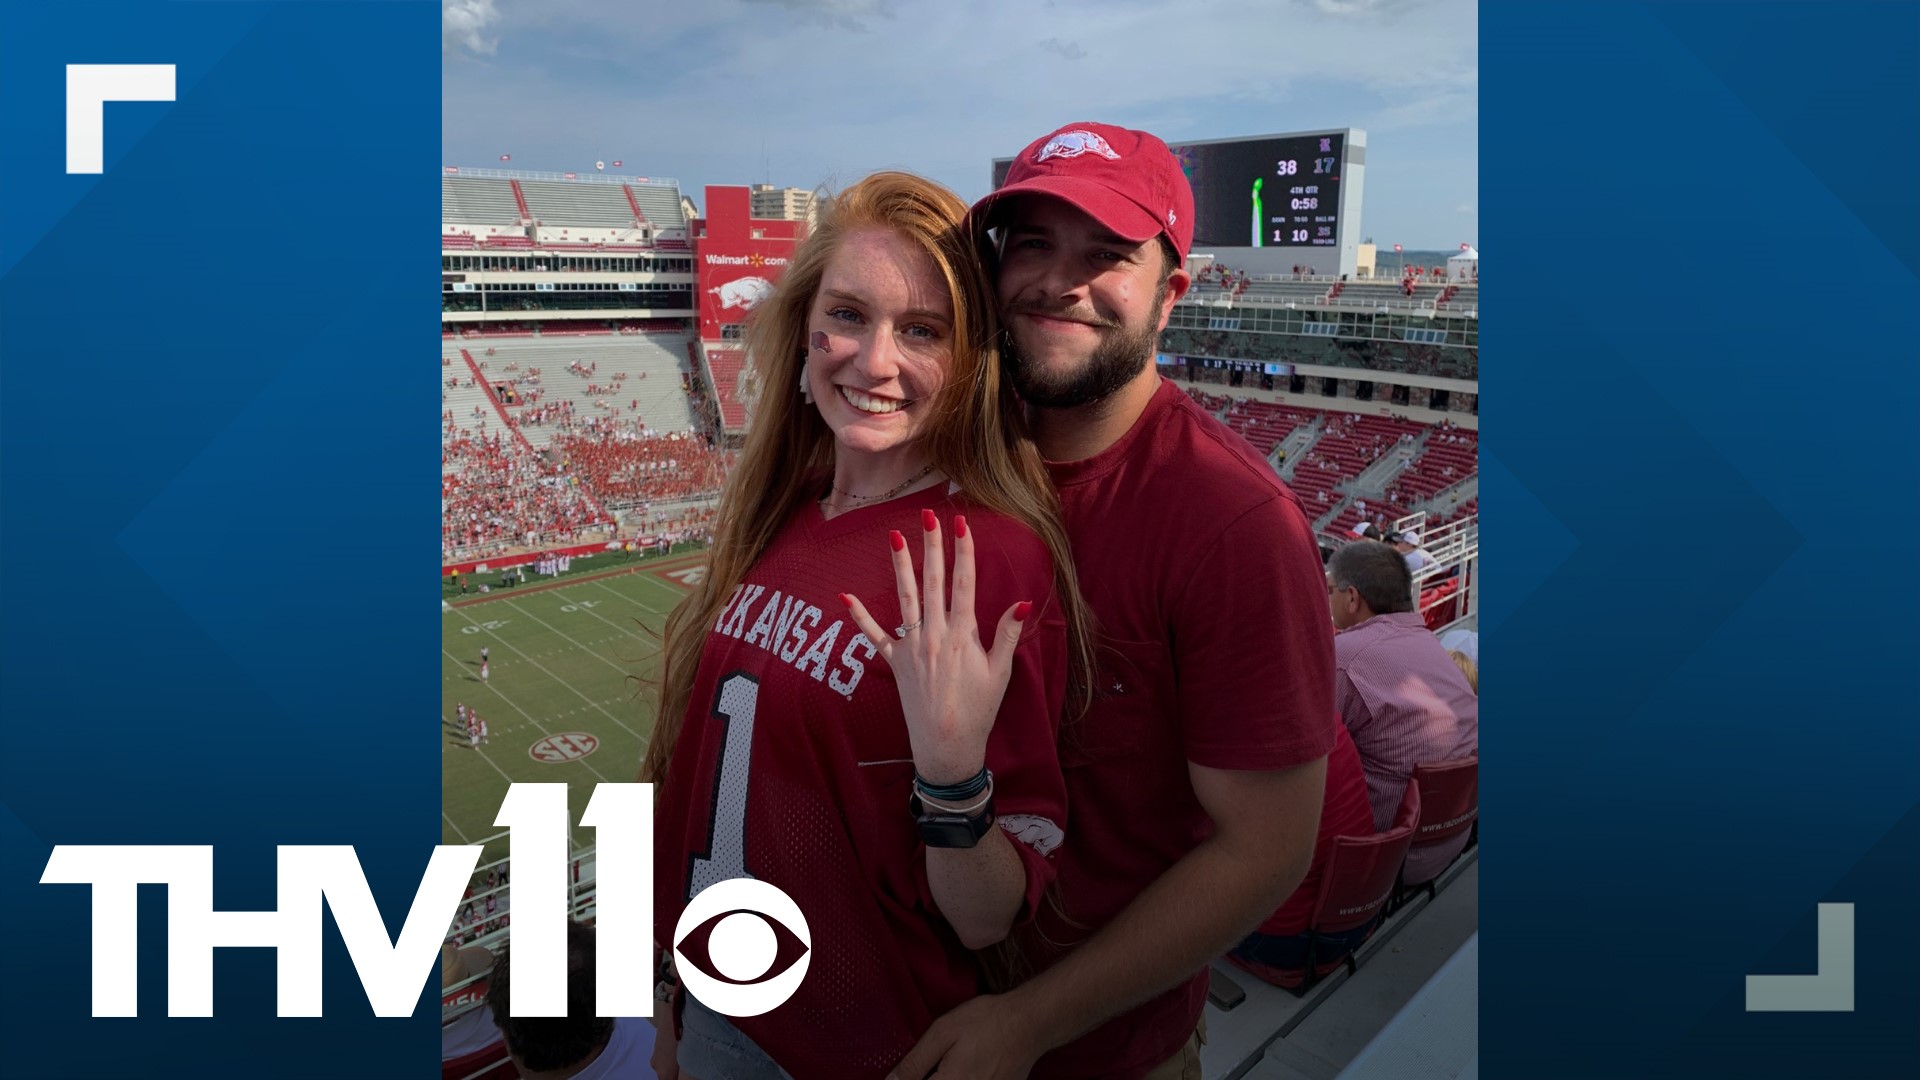 After the Hogs scored their first touchdown of the season, Jared Moore popped the question to Rainey Watson.